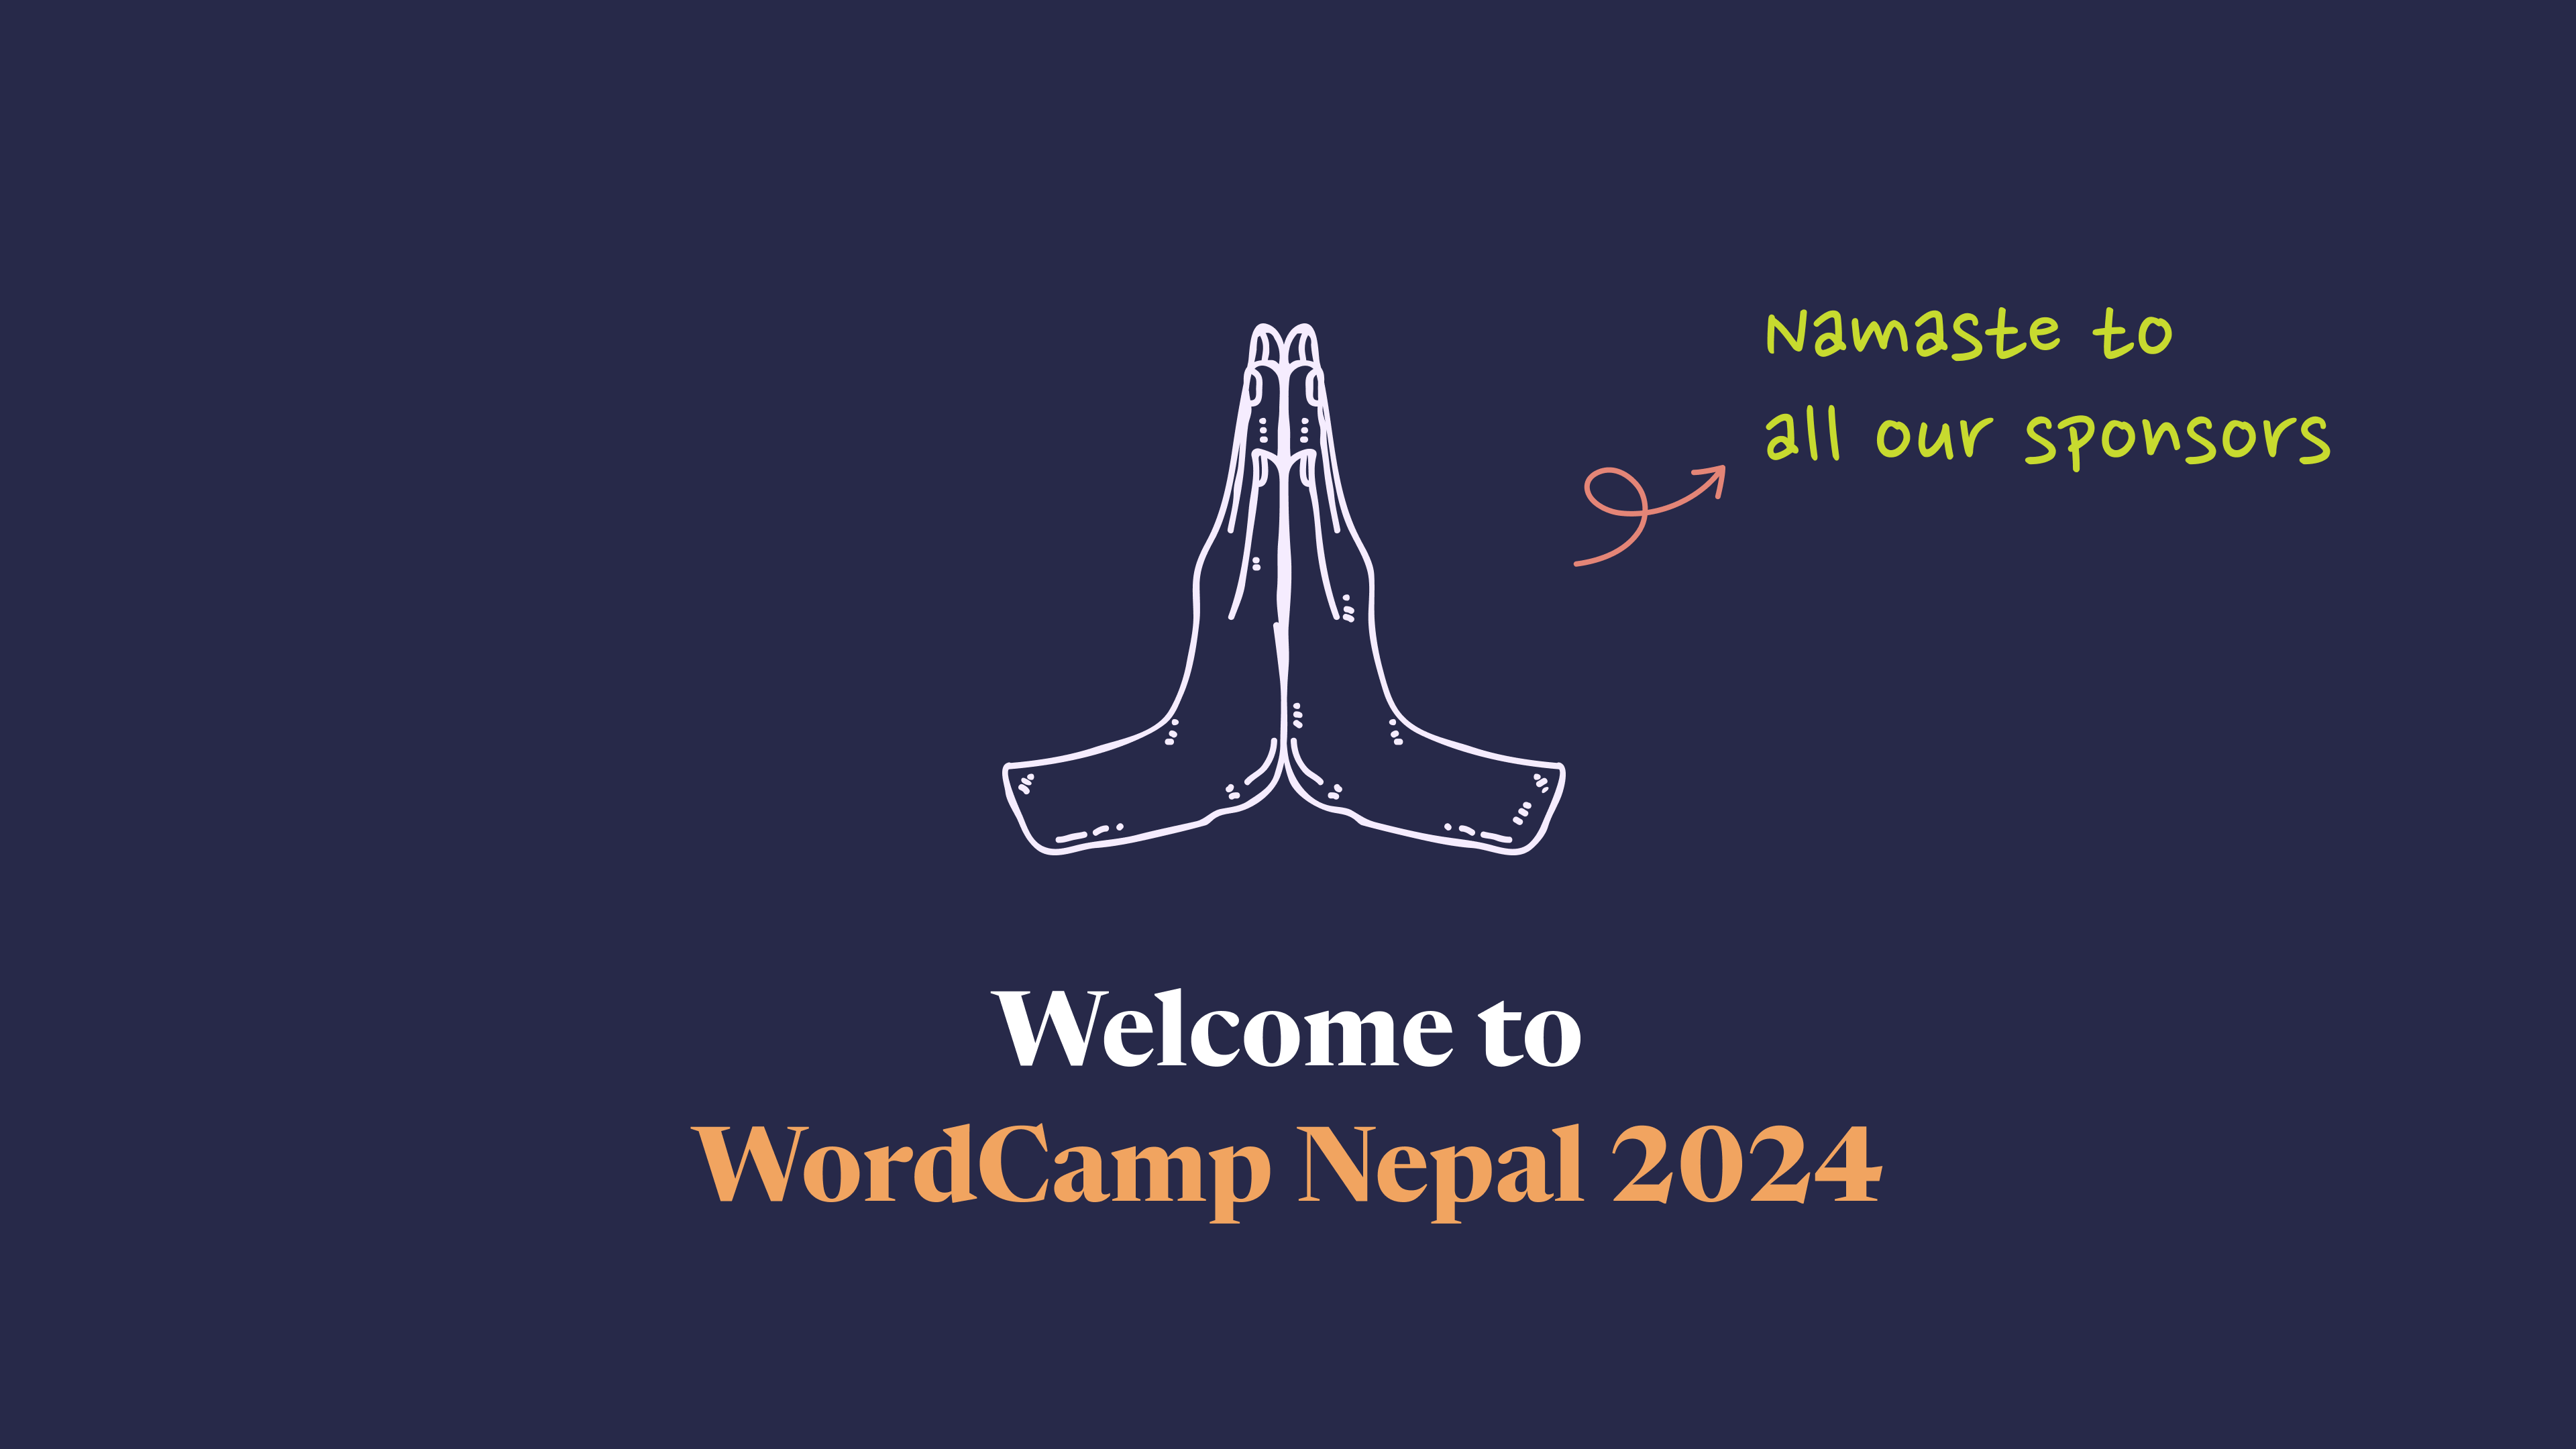 Ensuring a Smooth Experience for Our Sponsors at WordCamp Nepal 2024